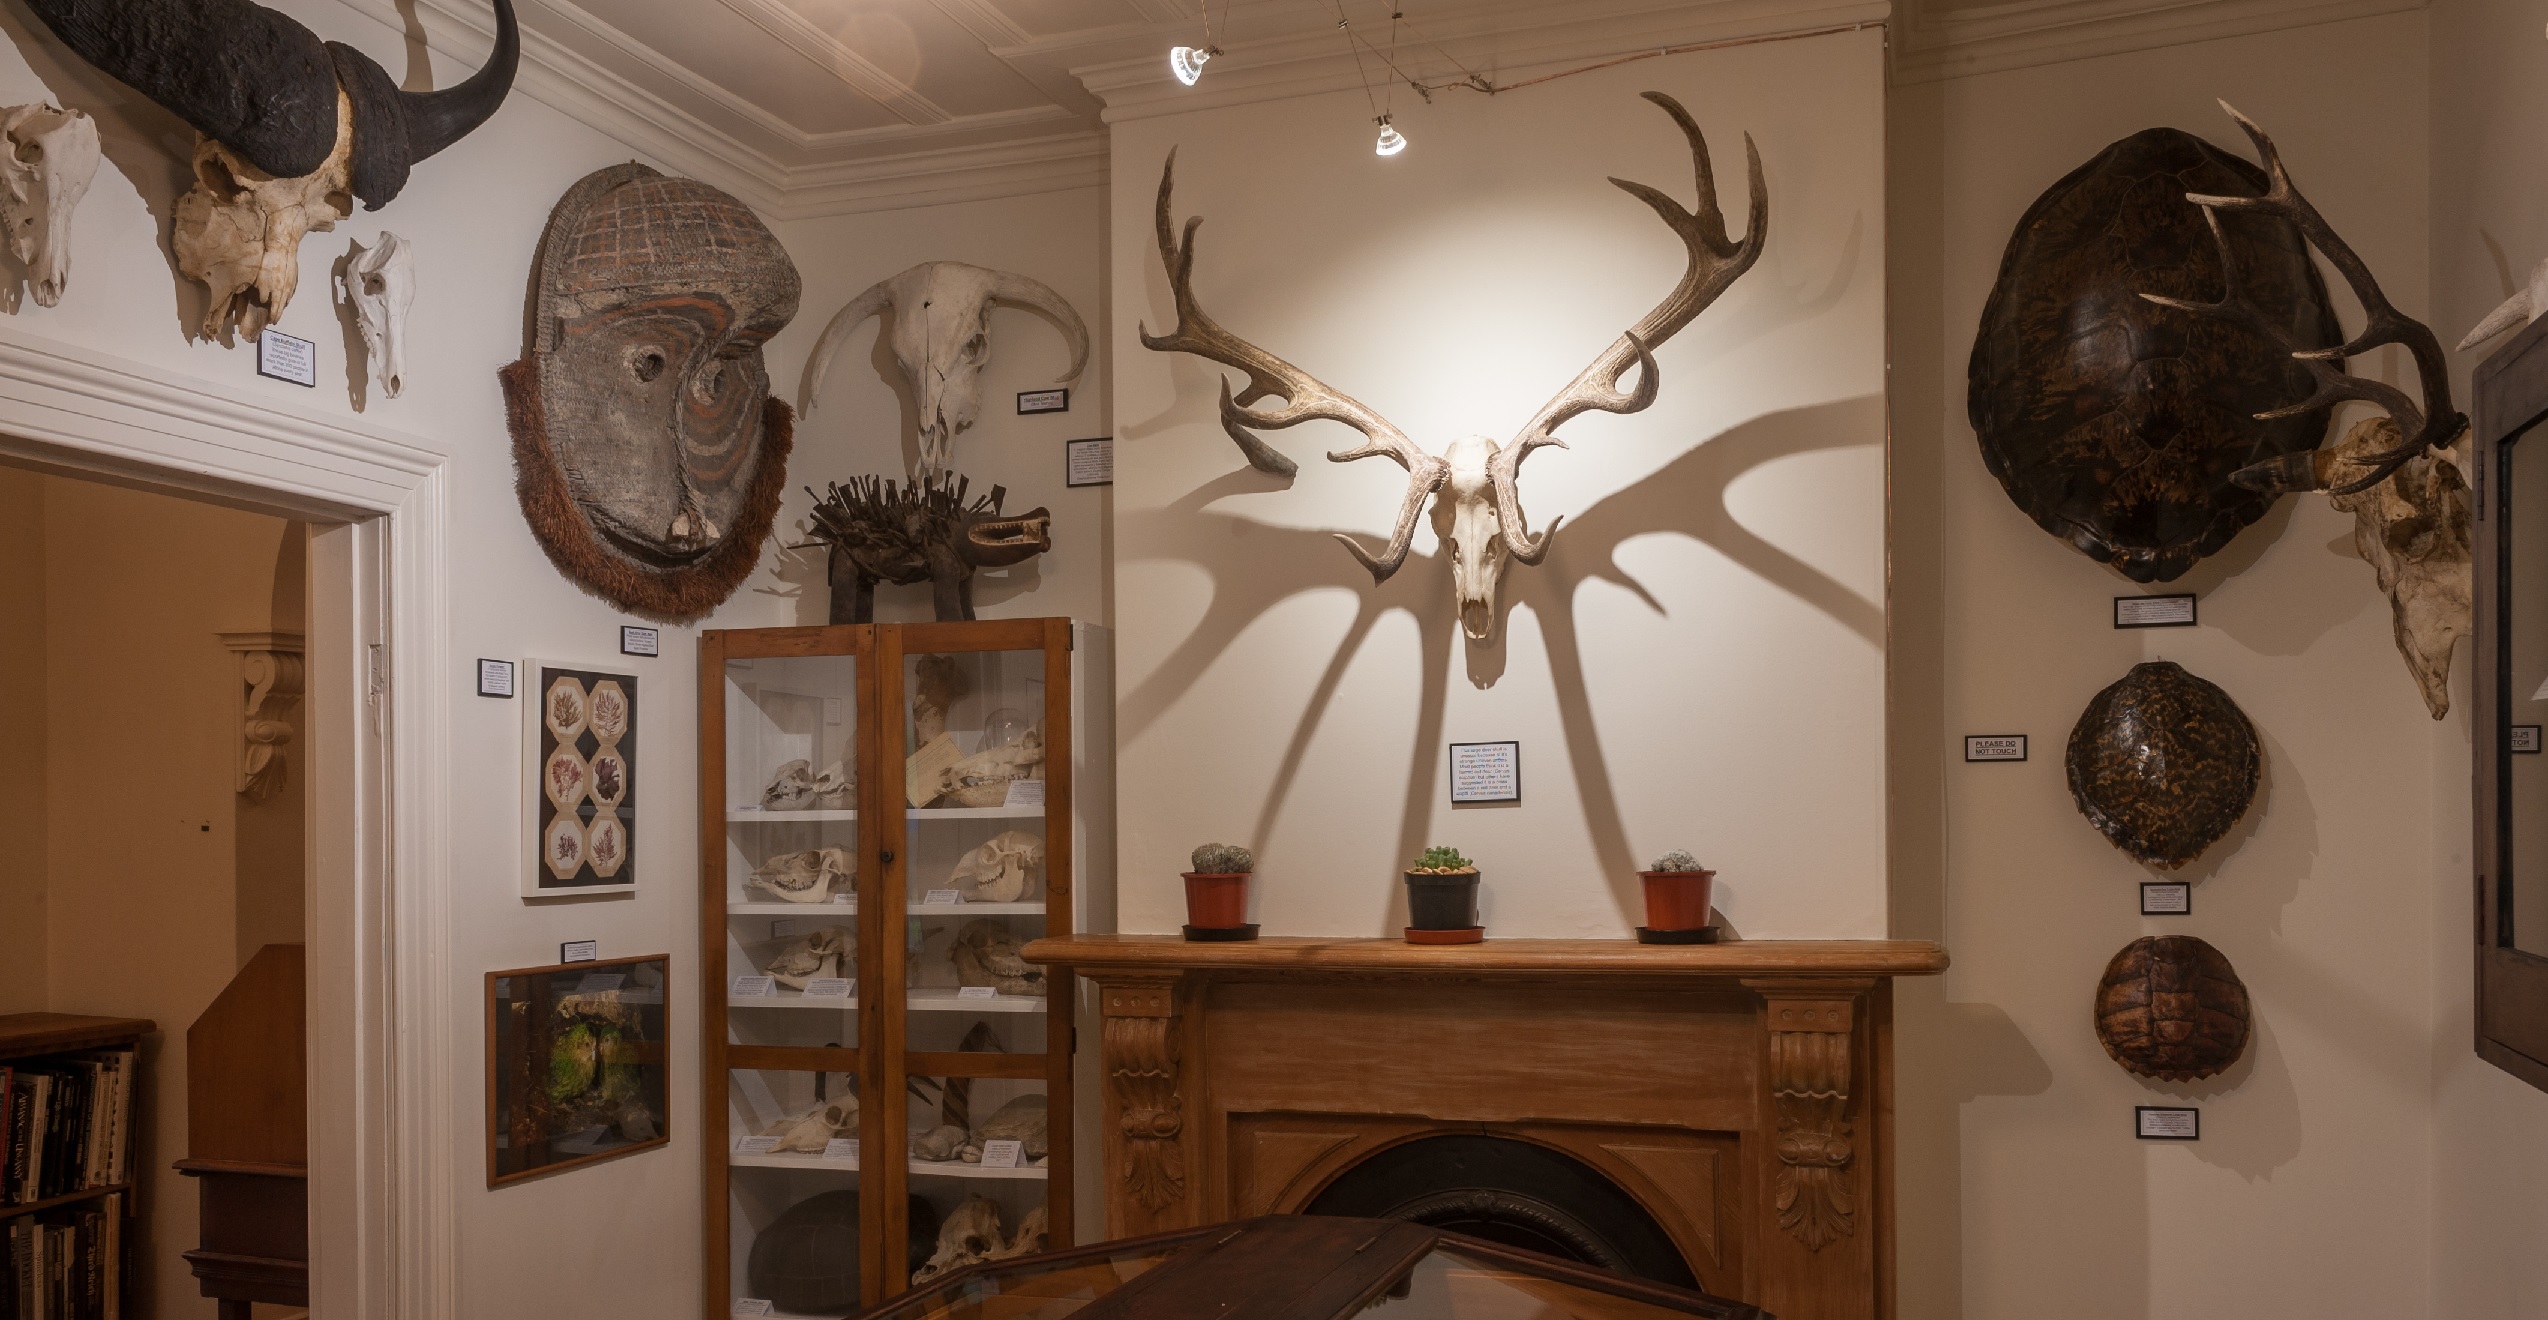 The Museum of Natural Mystery is built into Bruce Mahalski’s home. Credits- Alan Dove